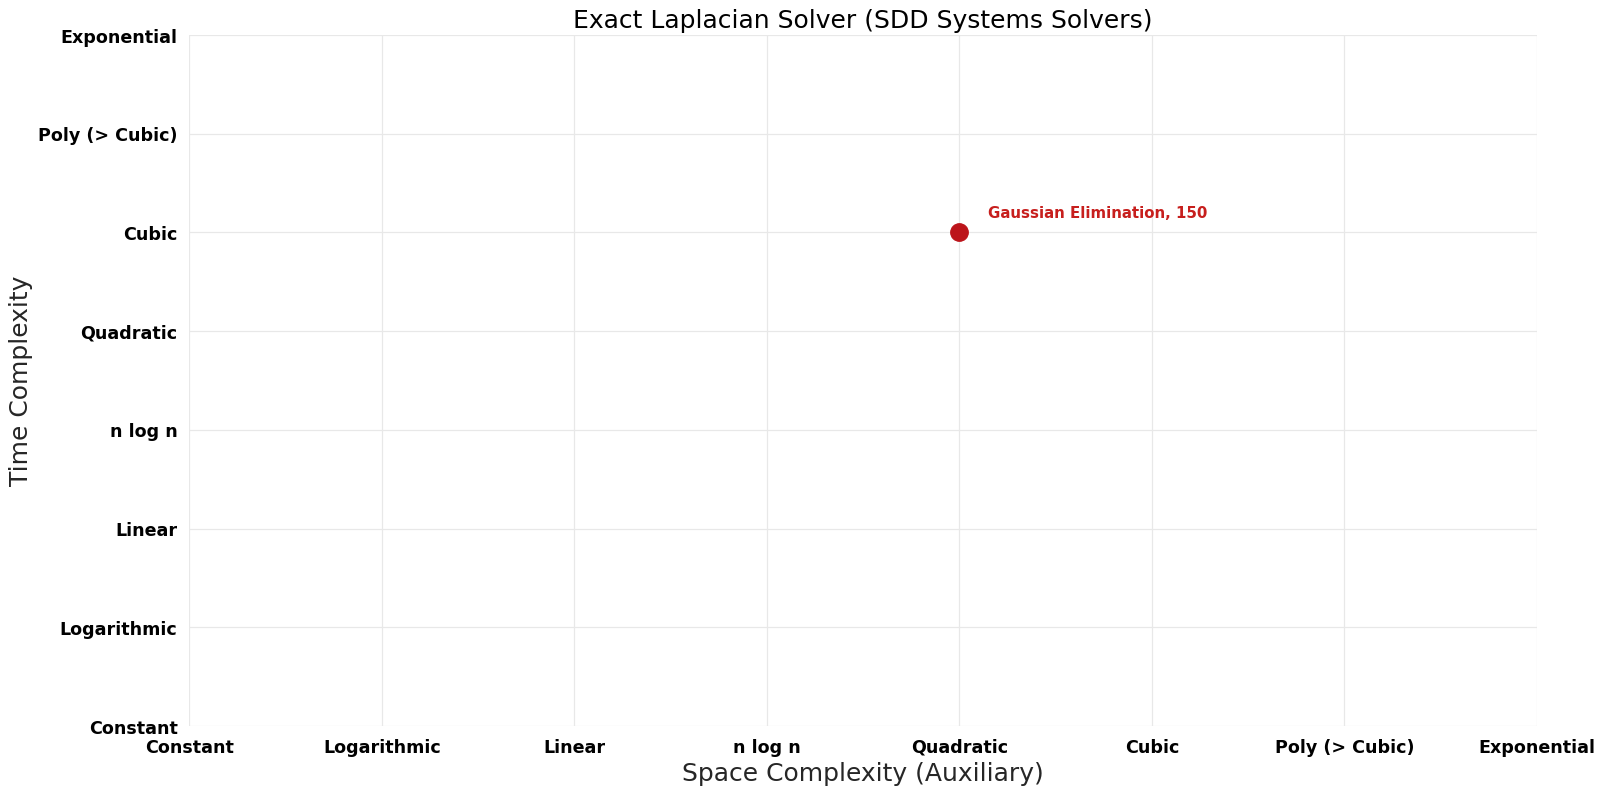 SDD Systems Solvers - Exact Laplacian Solver - Pareto Frontier.png